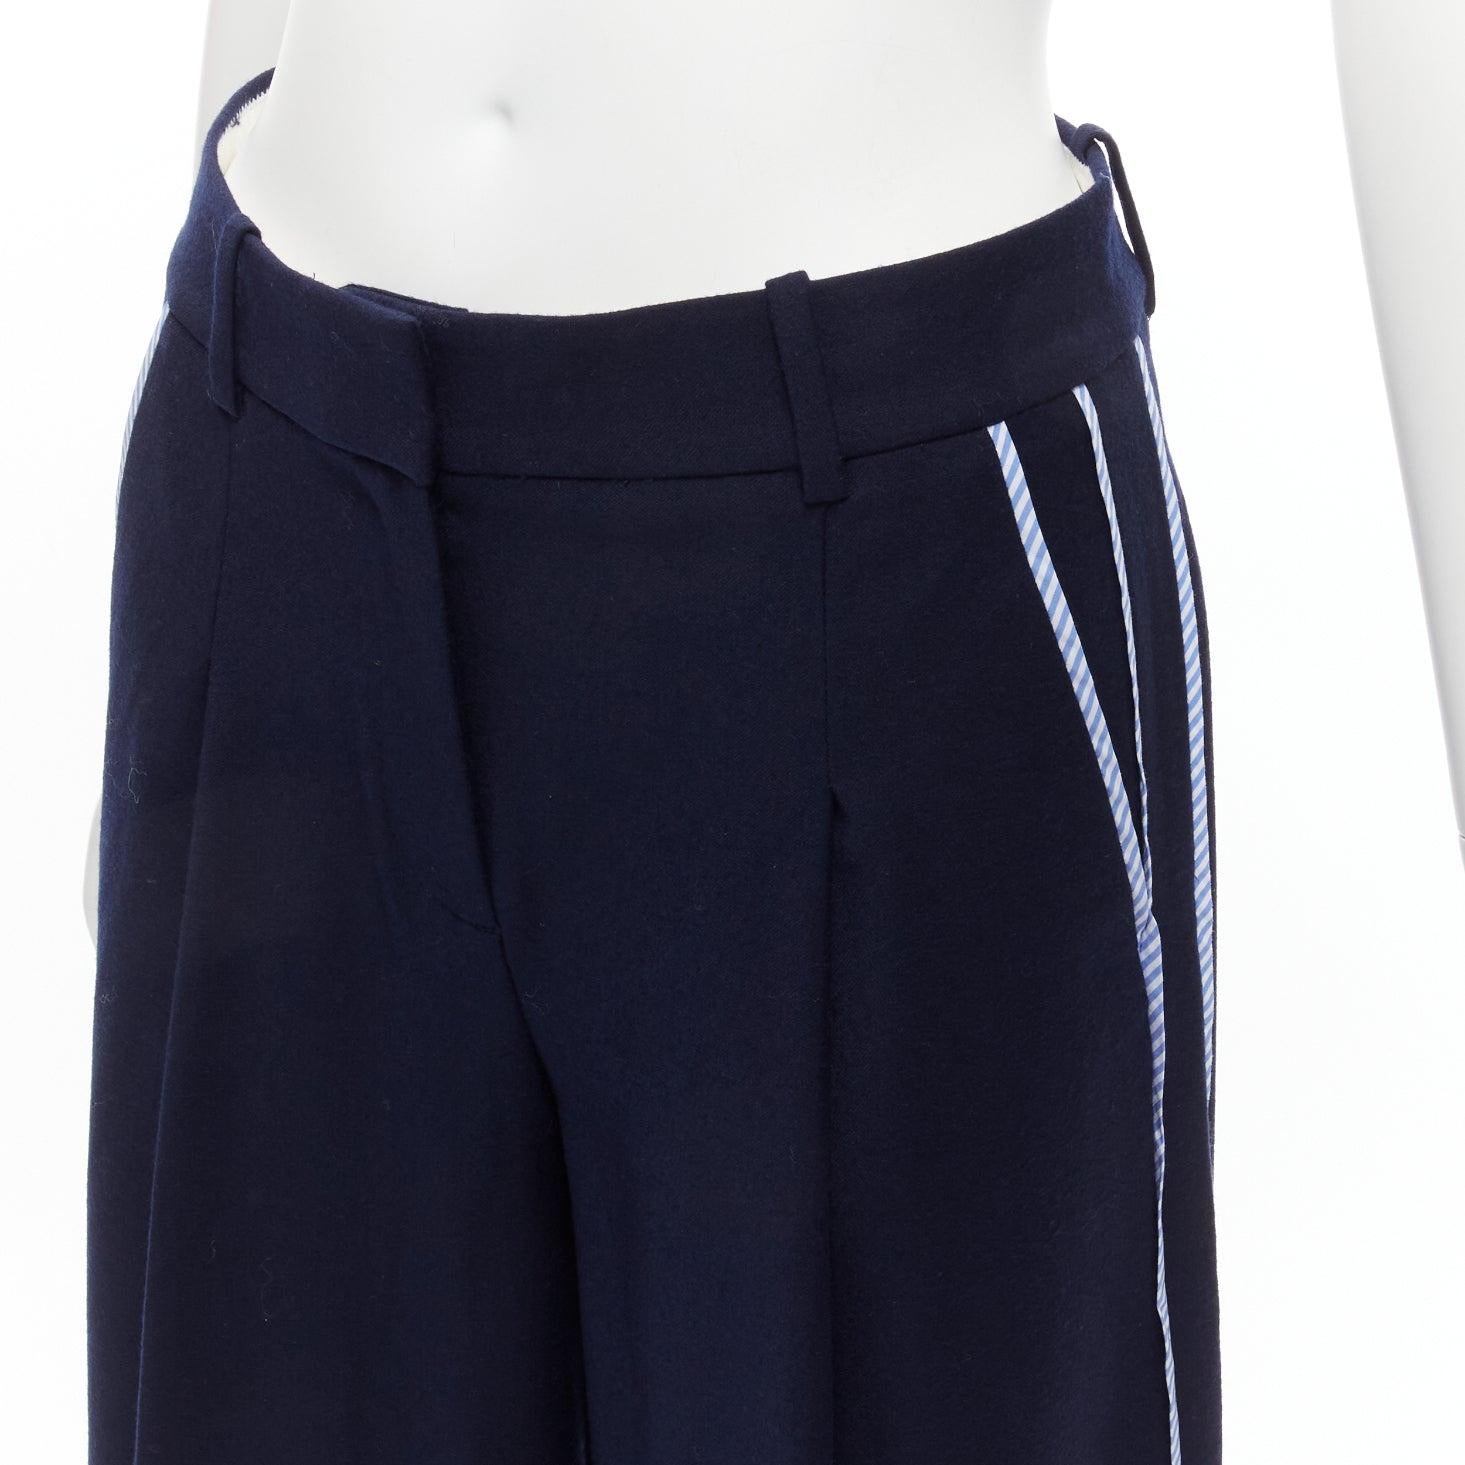 J.CREW Net-a-porter navy wool blend side stripe trim pleat front wide trousers US0 XS
Reference: SNKO/A00410
Brand: J.Crew
Collection: Net-a-porter
Material: Wool, Blend
Color: Navy, Multicolour
Pattern: Pinstriped
Closure: Zip Fly
Lining: White